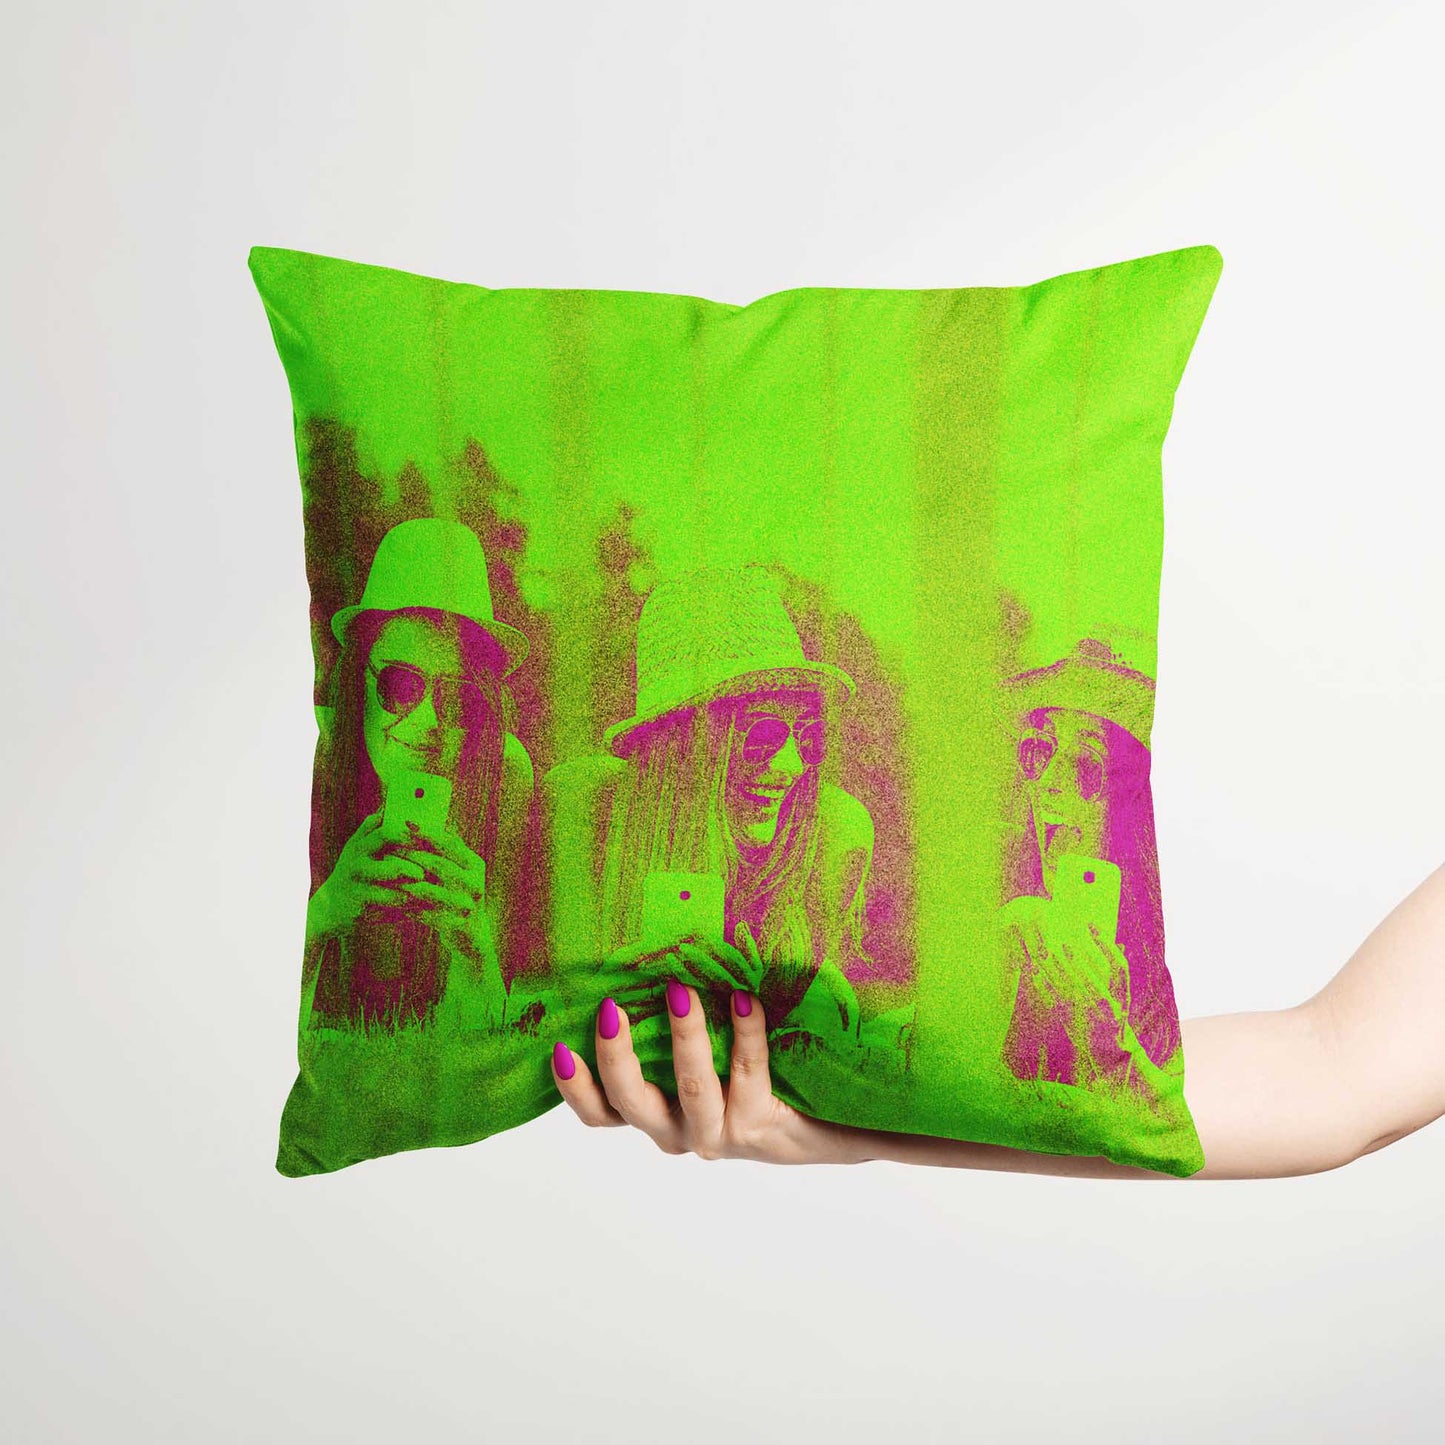 Infuse your home with a sense of fun and excitement with the Personalised Neon Green Cushion. Its fresh and vibrant design creates a lively party atmosphere that is sure to uplift spirits. Crafted from soft velvet and meticulously handmade